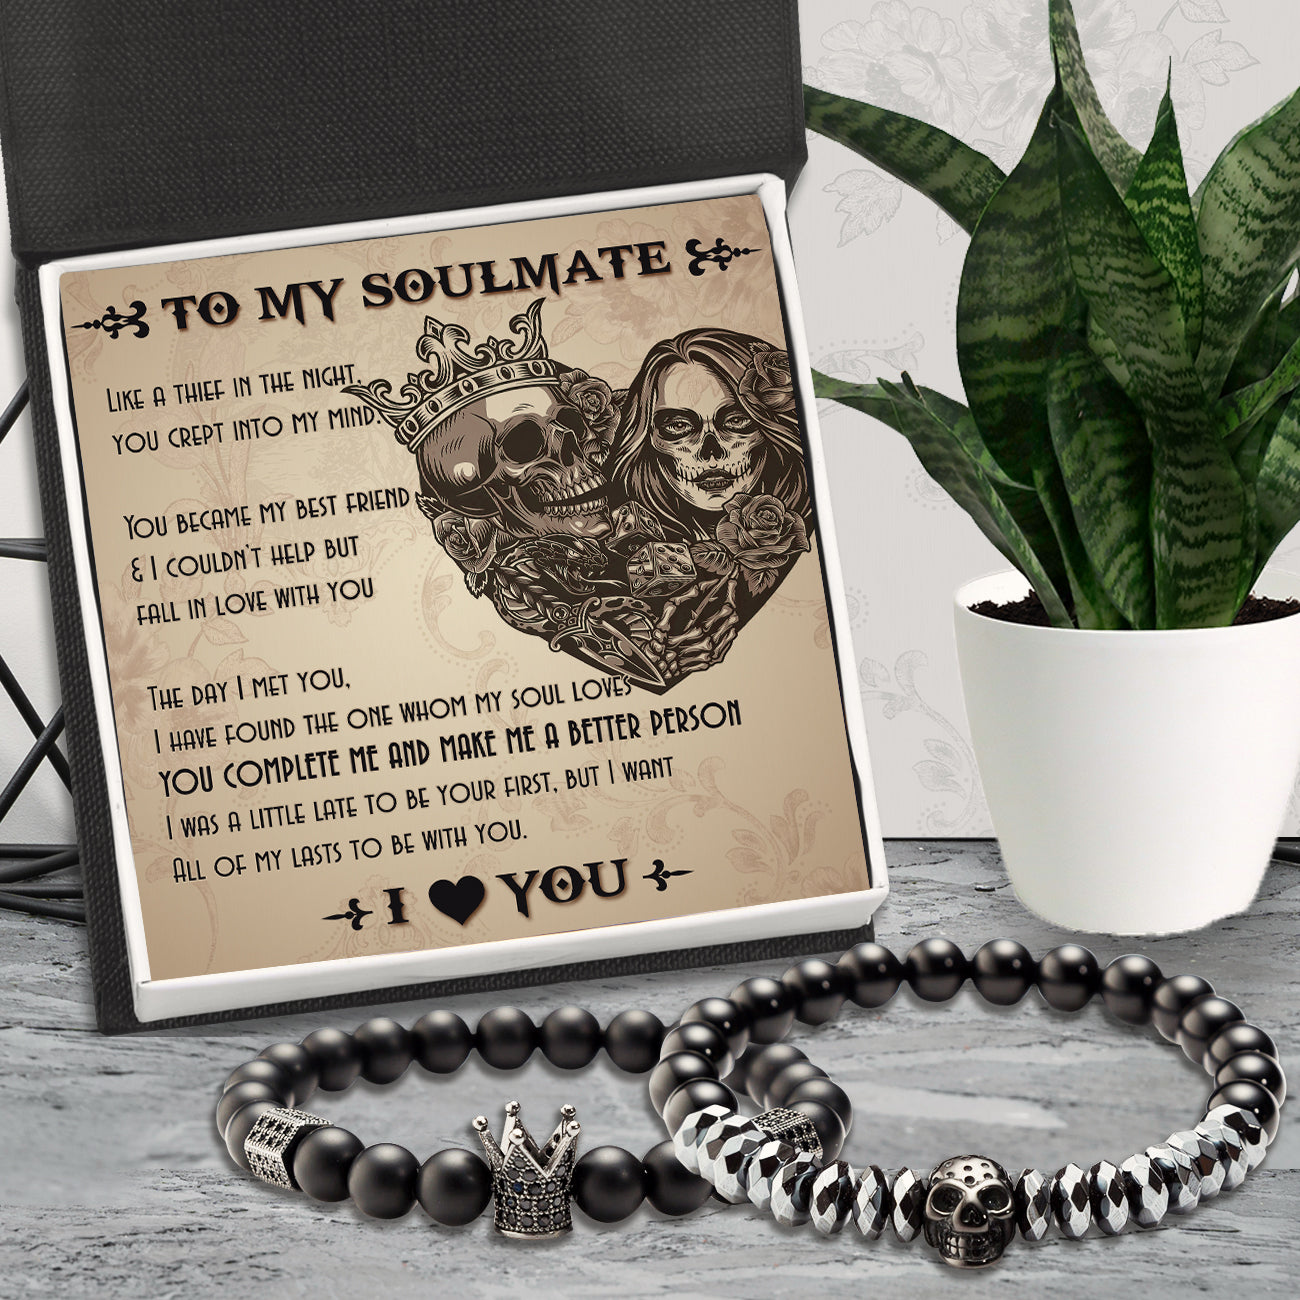 Couple Crown and Skull Bracelets - Skull & Tattoos - To Couple - I Love You - Ukgbu26002